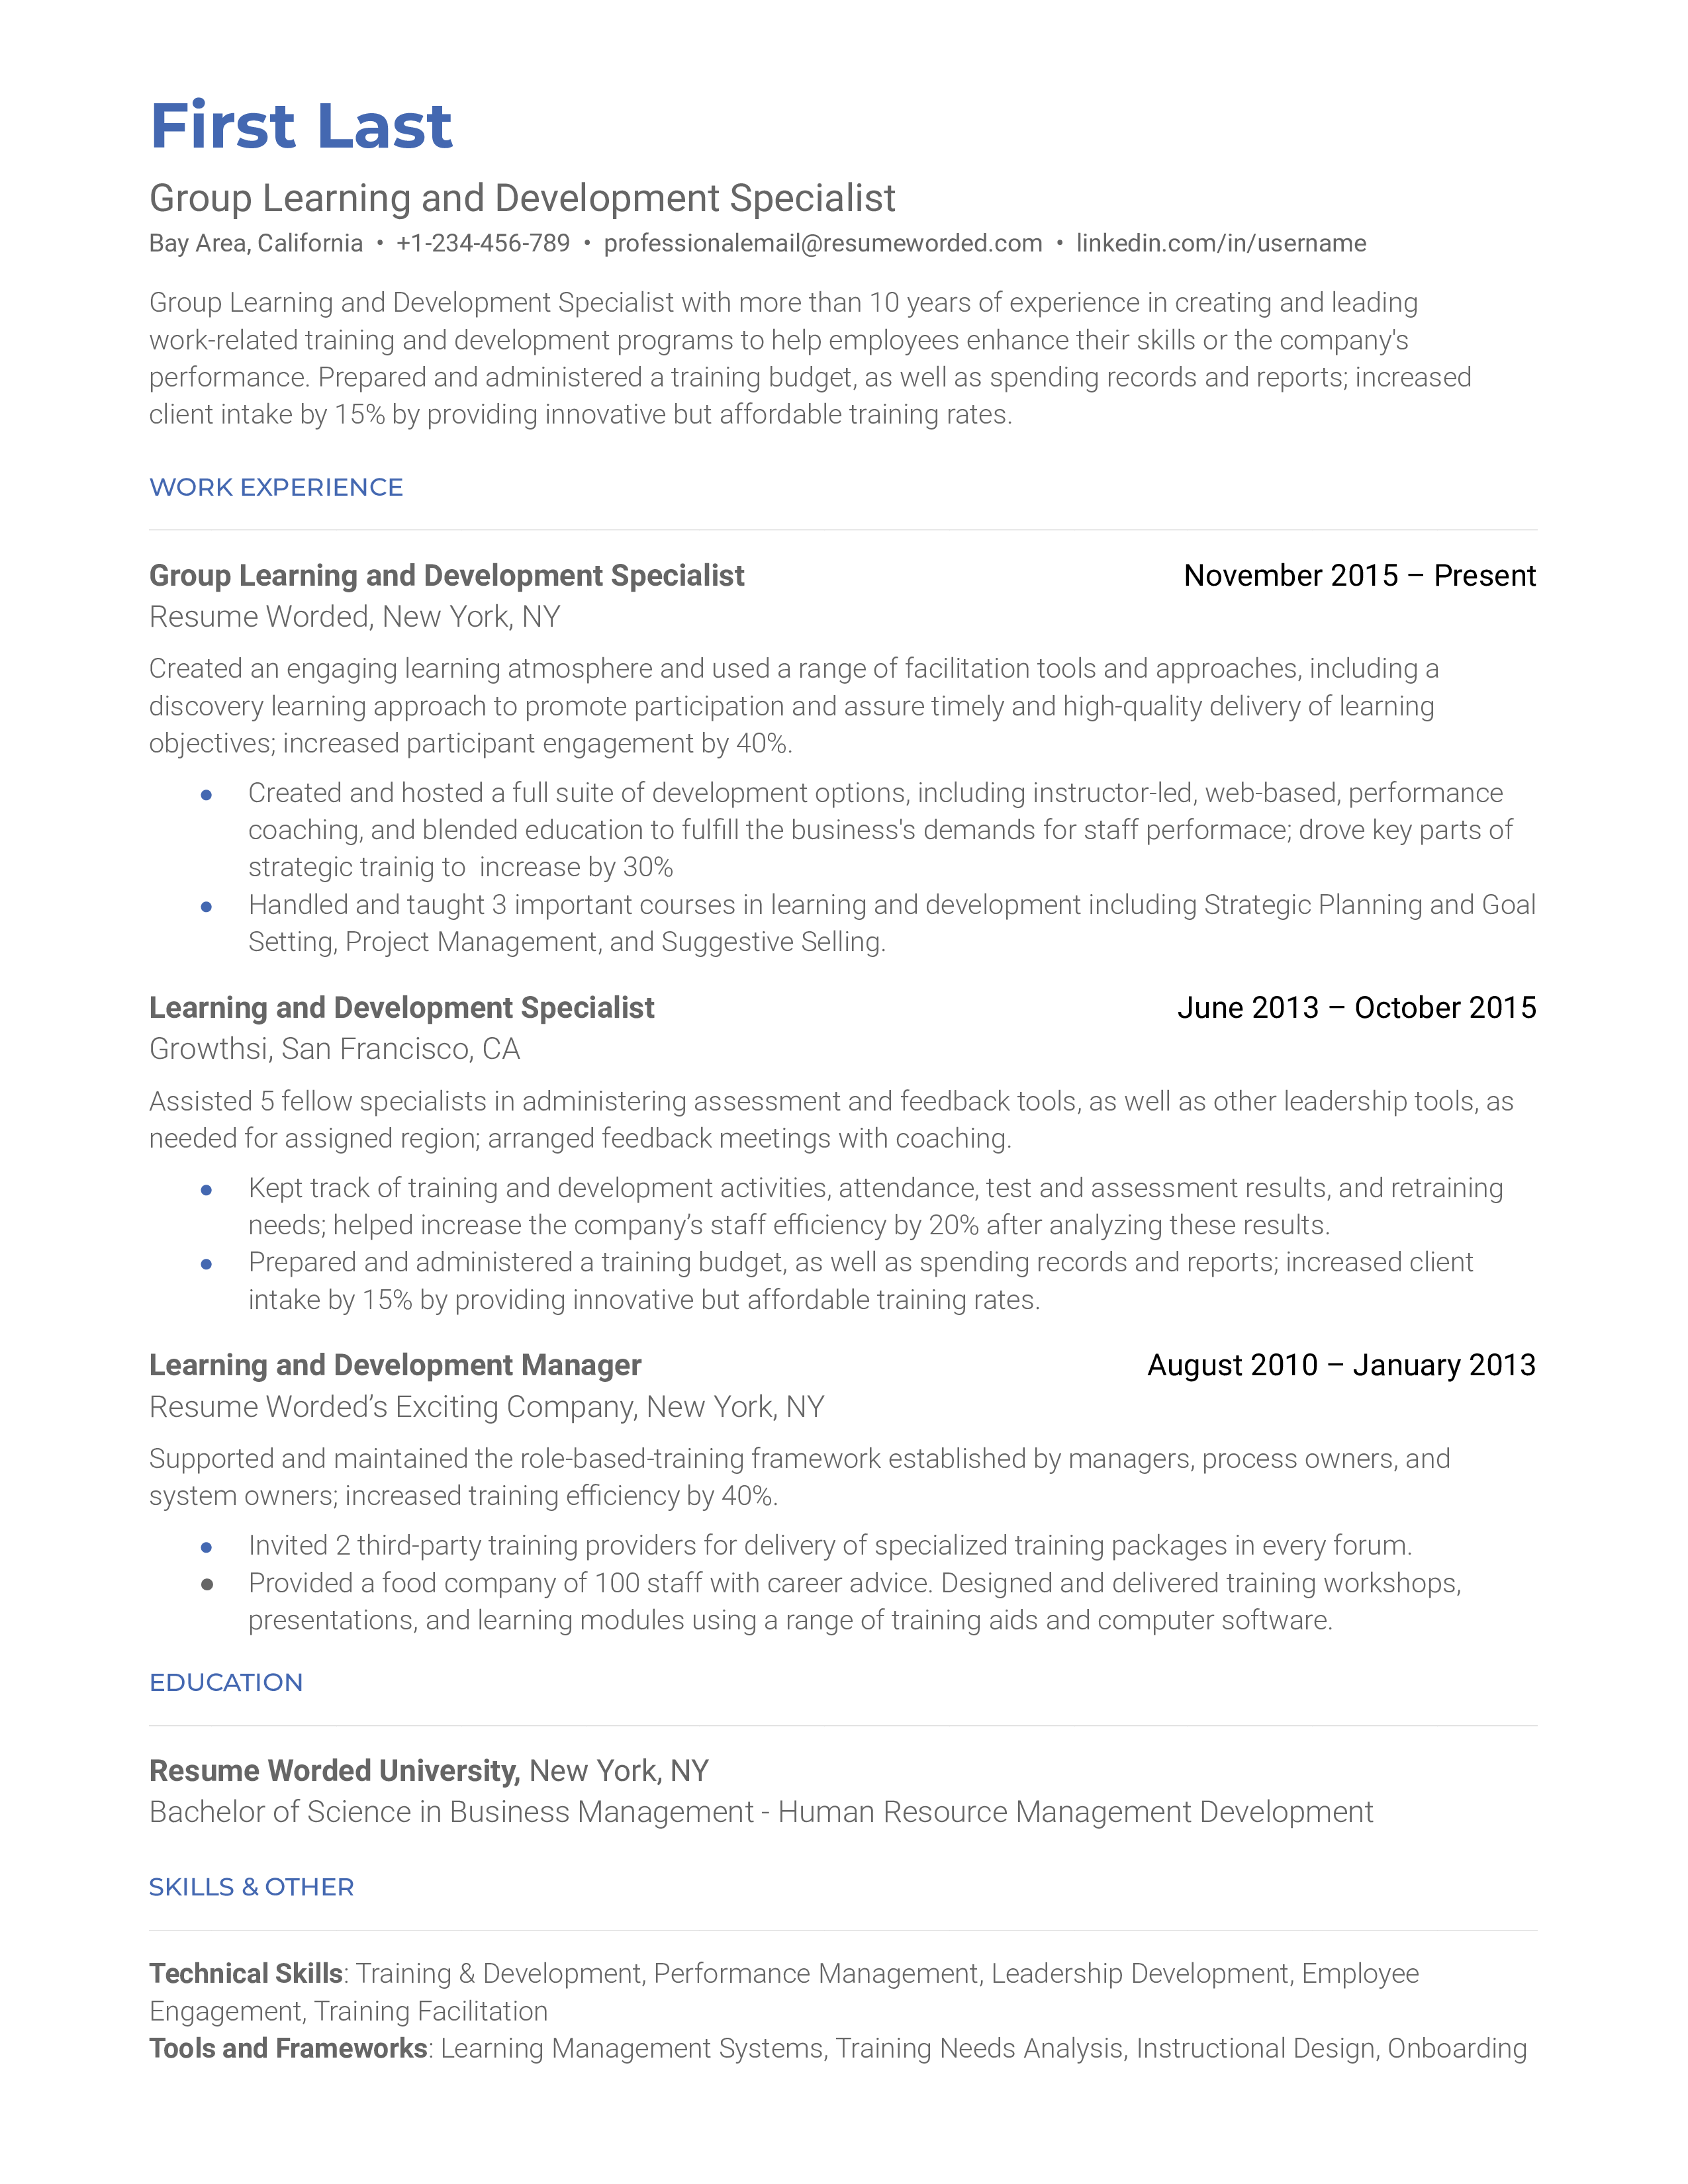 Group Learning and Development Specialist Resume Template + Example